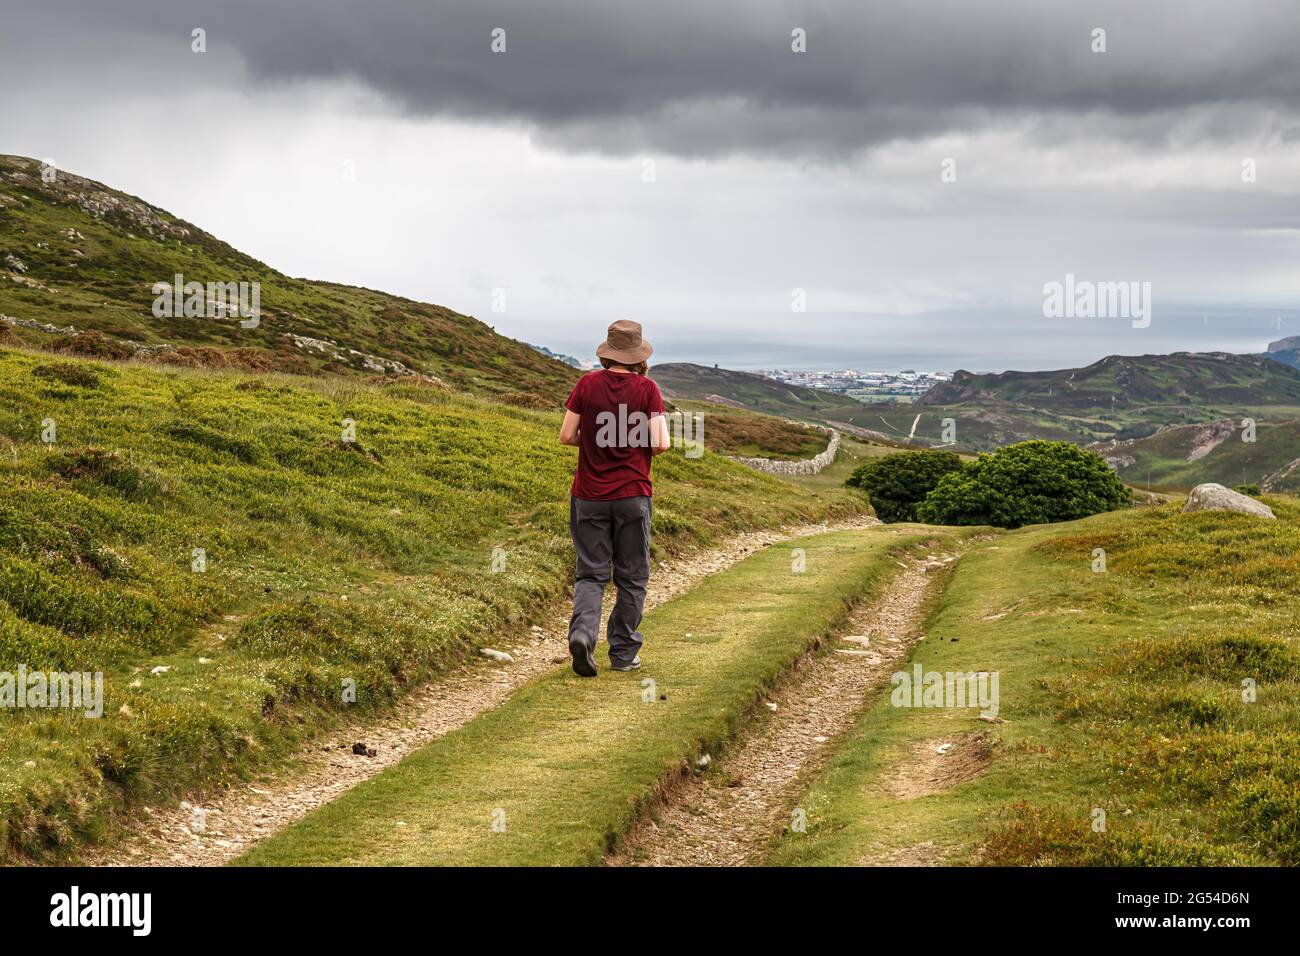 A single female on a ramble along the mountain track on the scenic Wales Coastal Path at Penmaenmawr, Cony, Wales Stock Photo